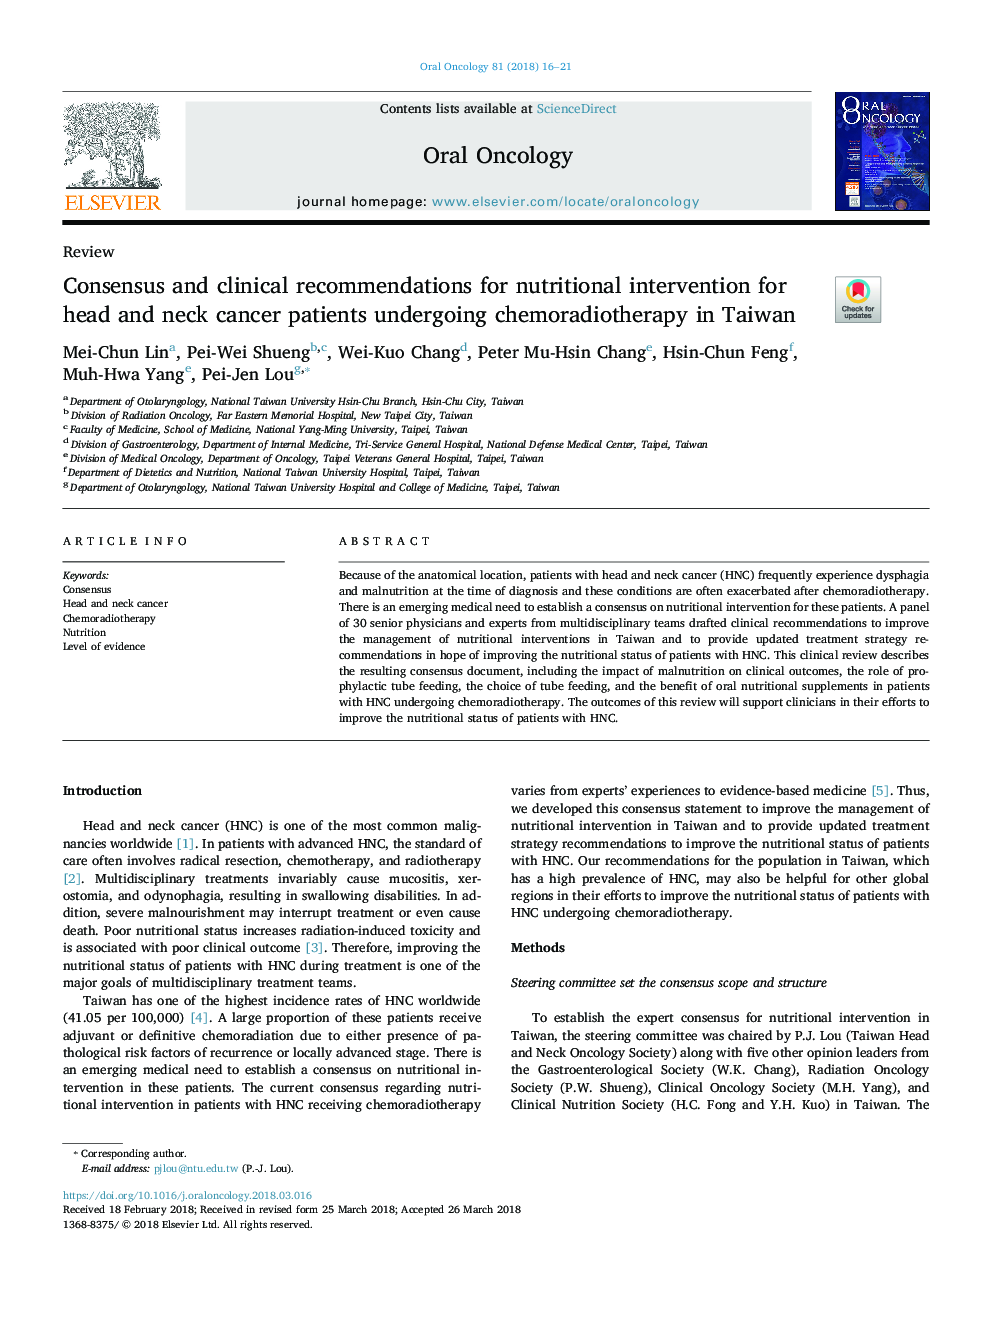 Consensus and clinical recommendations for nutritional intervention for head and neck cancer patients undergoing chemoradiotherapy in Taiwan